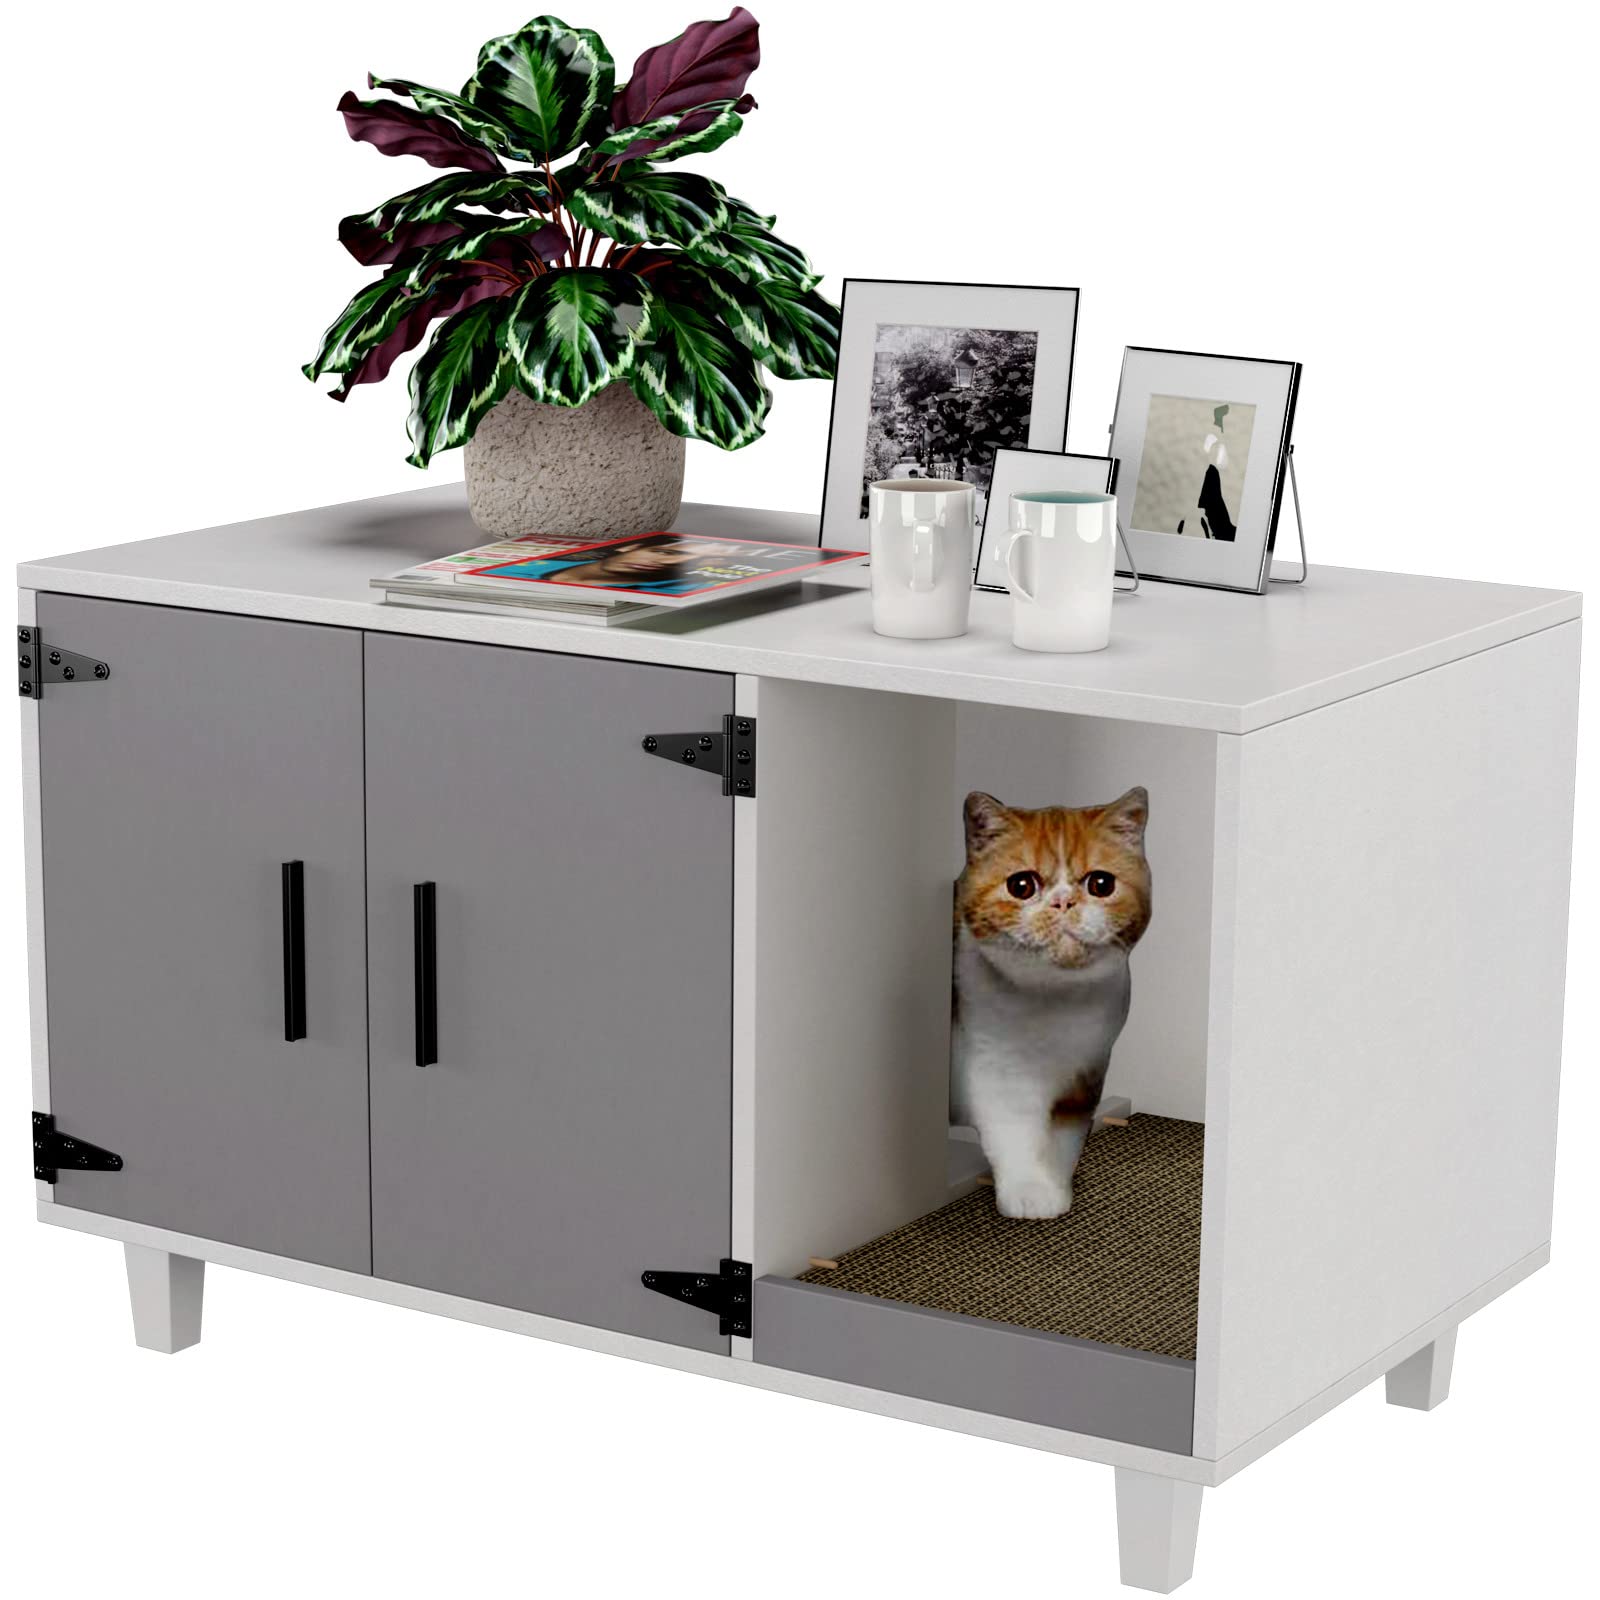 Gdlf Modern Wood Pet Crate Cat Washroom Hidden Litter Box Enclosure Furniture House As Table Nightstand With Scratch Pad,Stackab